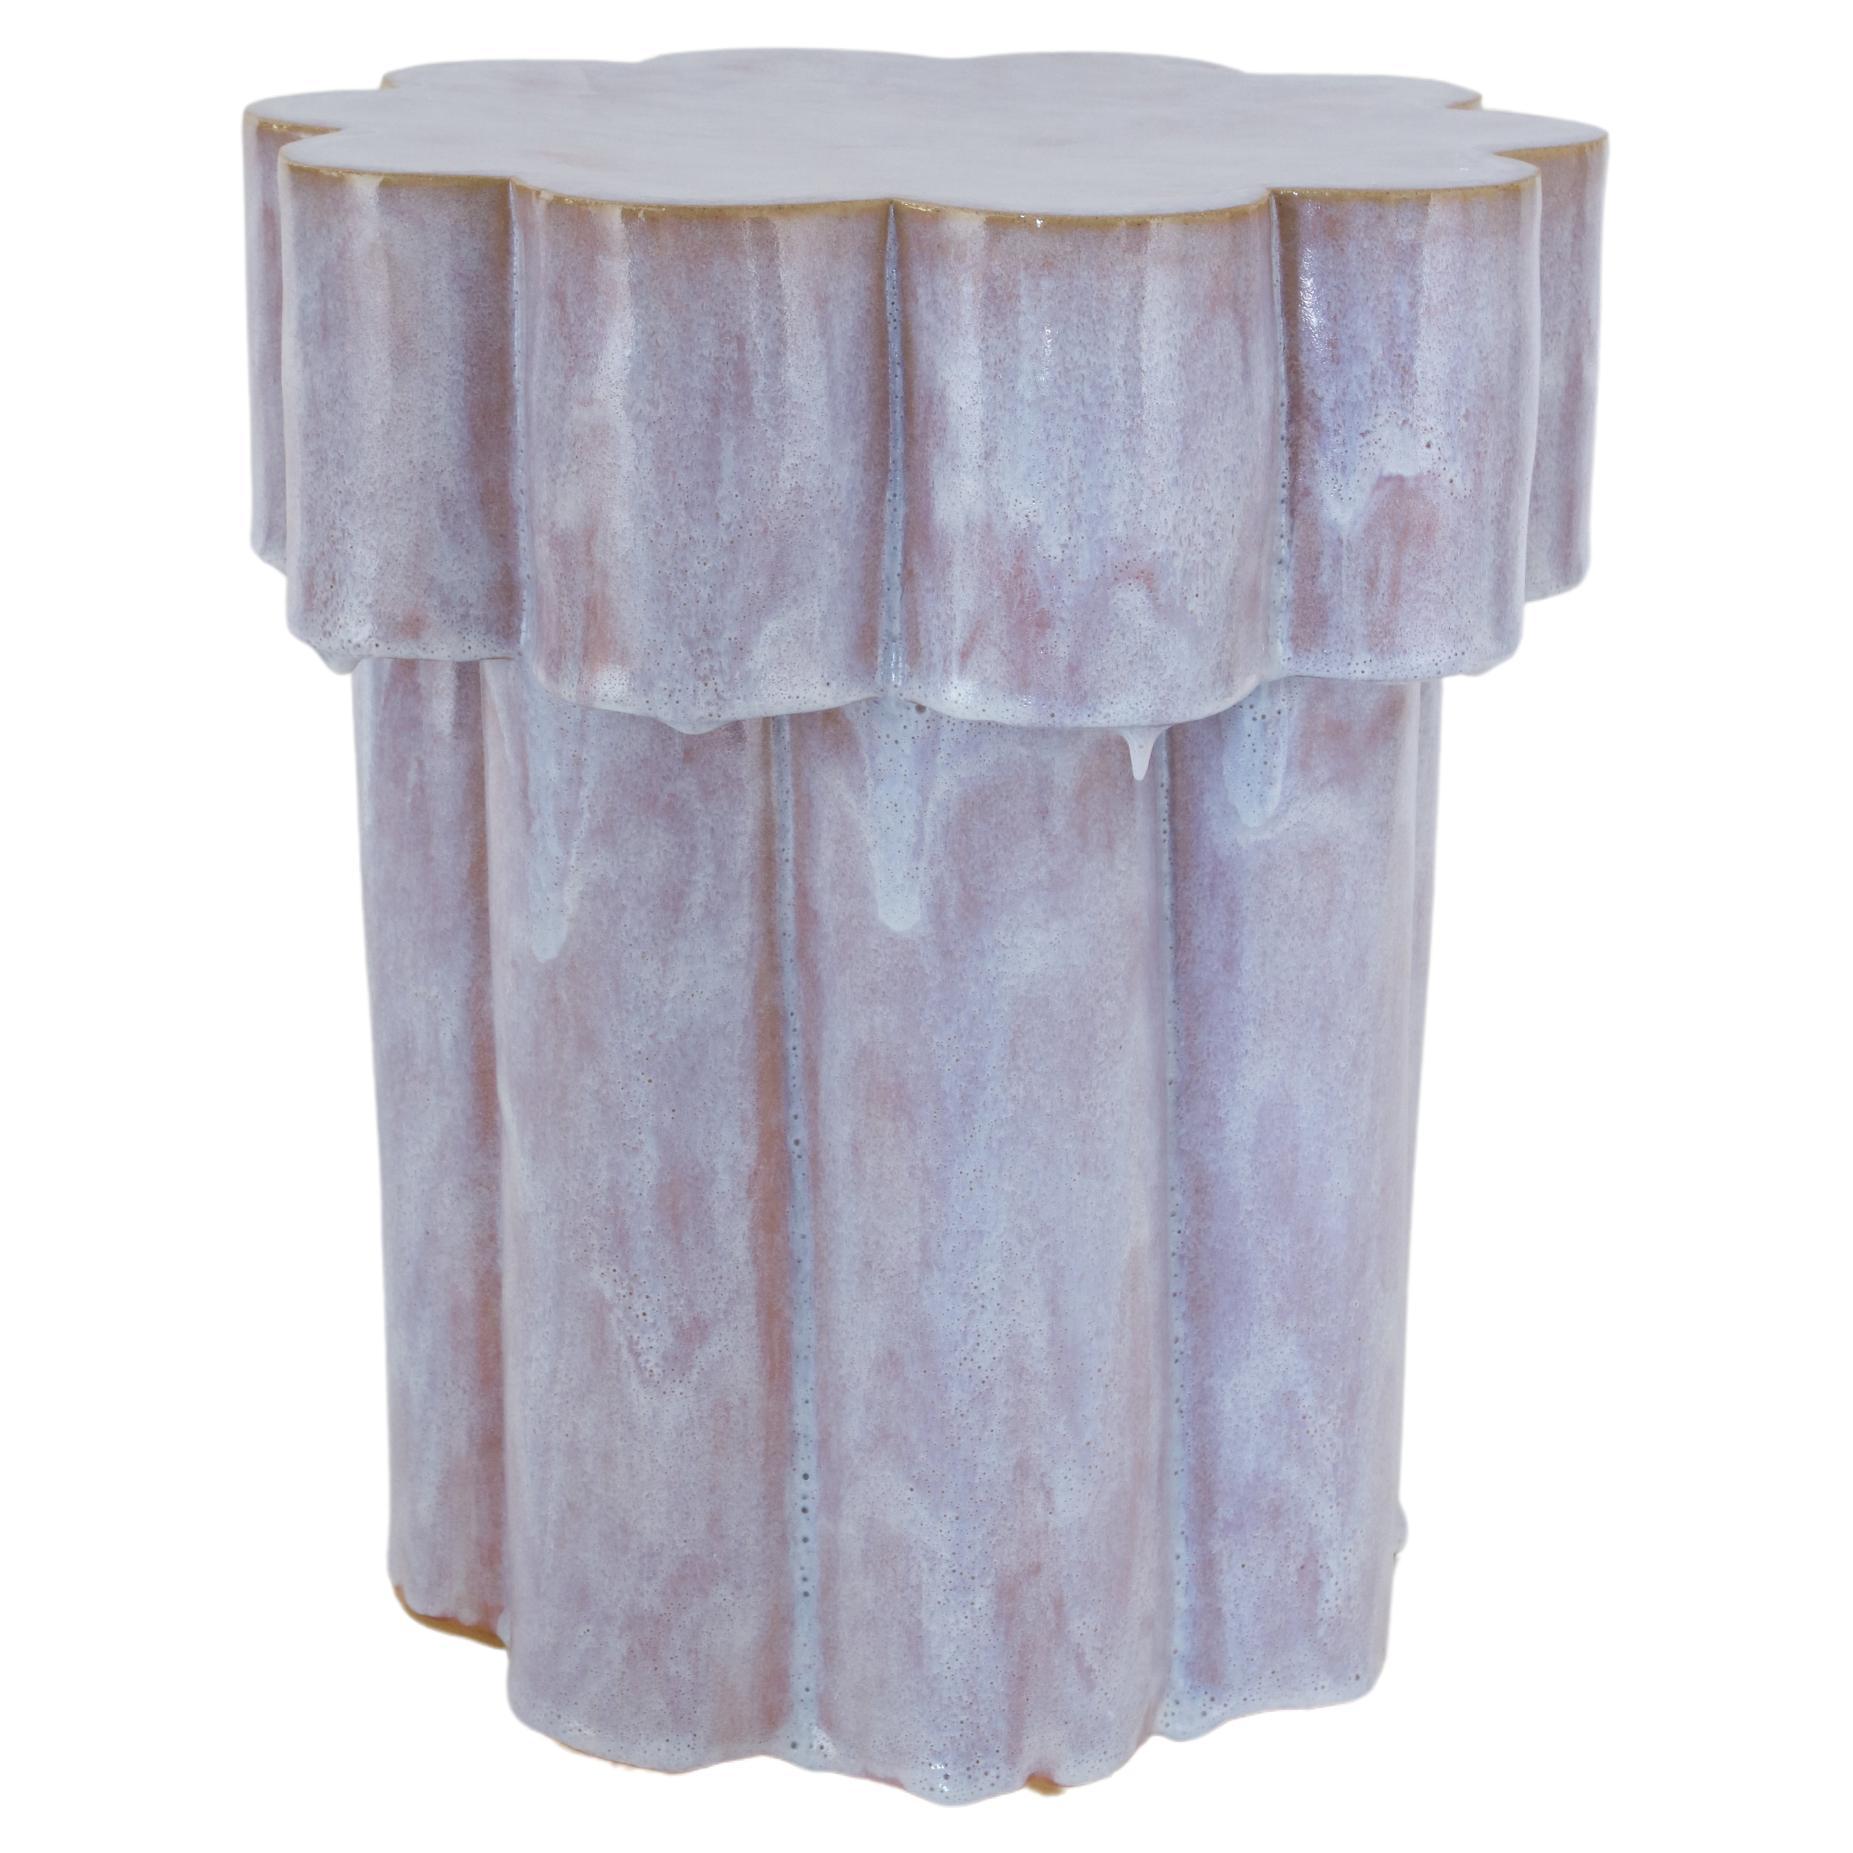 Two-Tier Ceramic Cloud Side Table & Stool in Pink Ice by BZIPPY